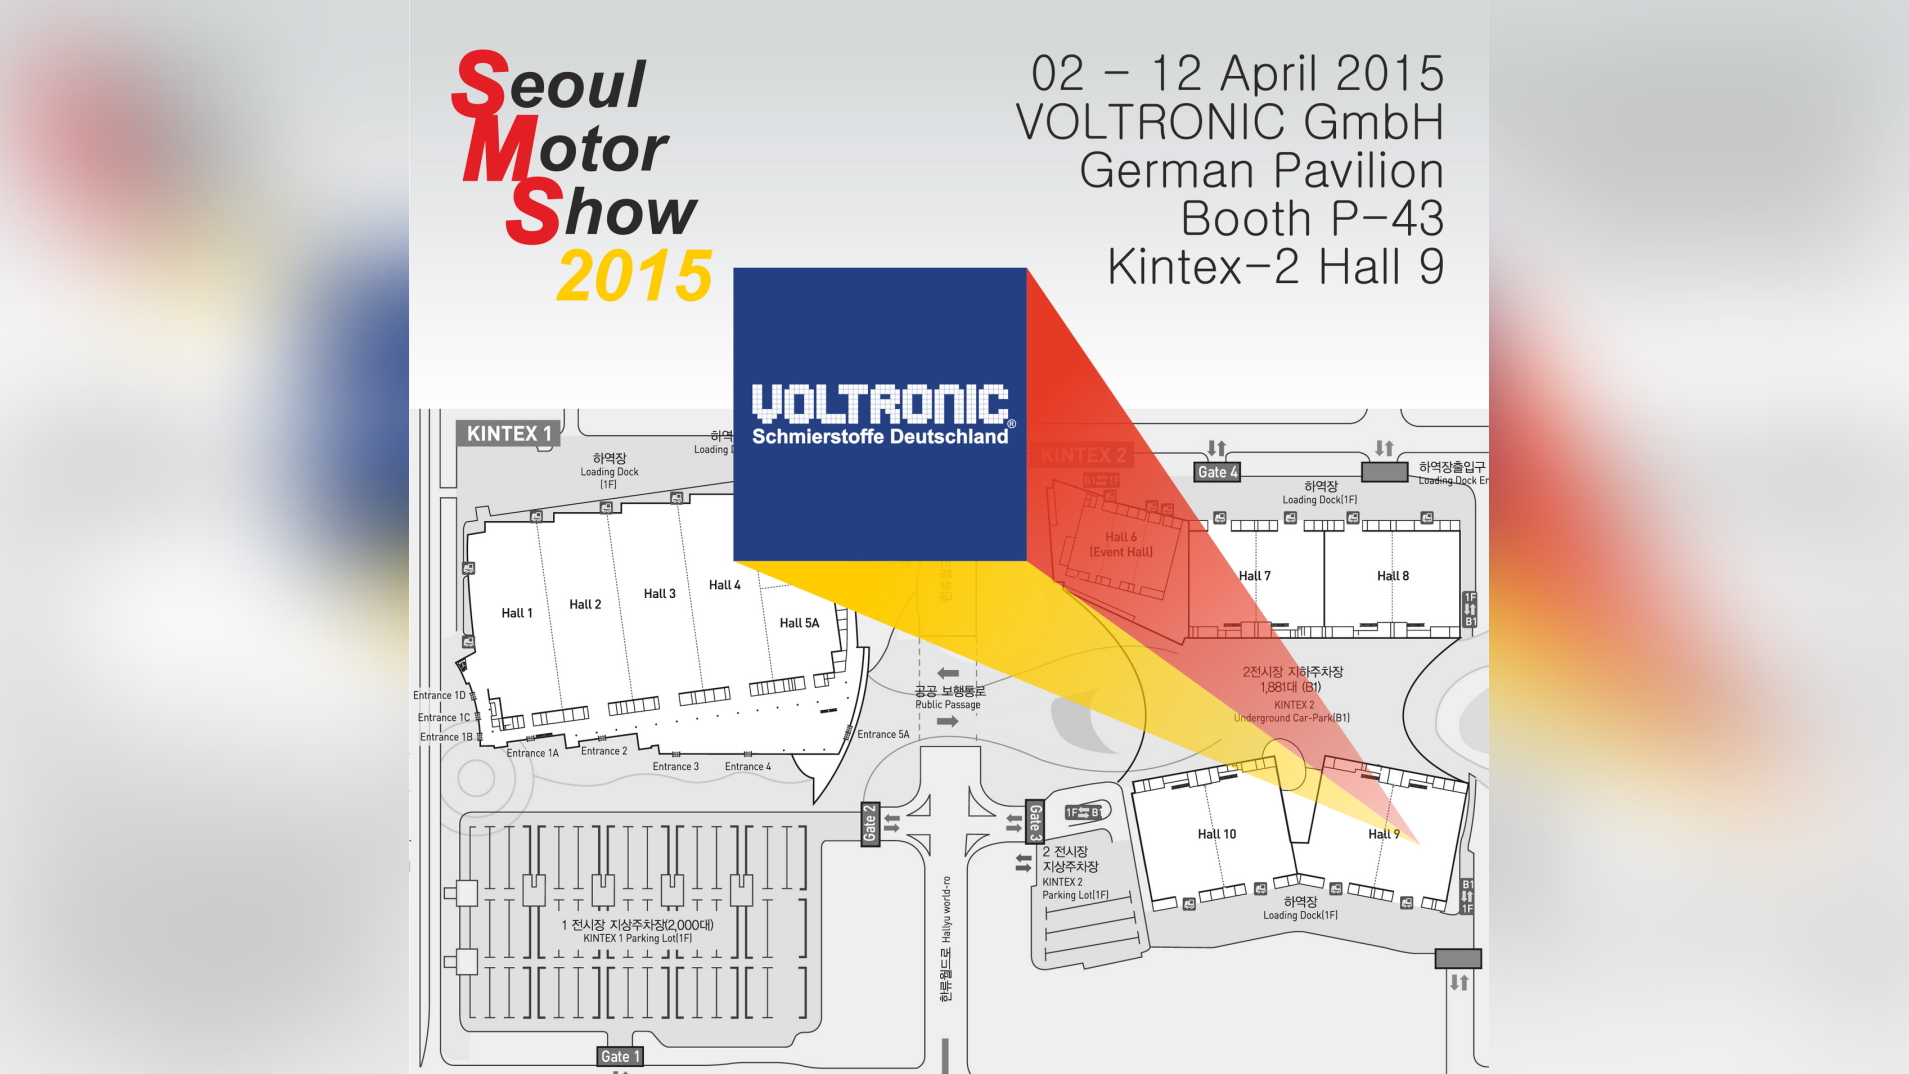 VOLTRONIC Germany debut in Seoul Motor Show 2015